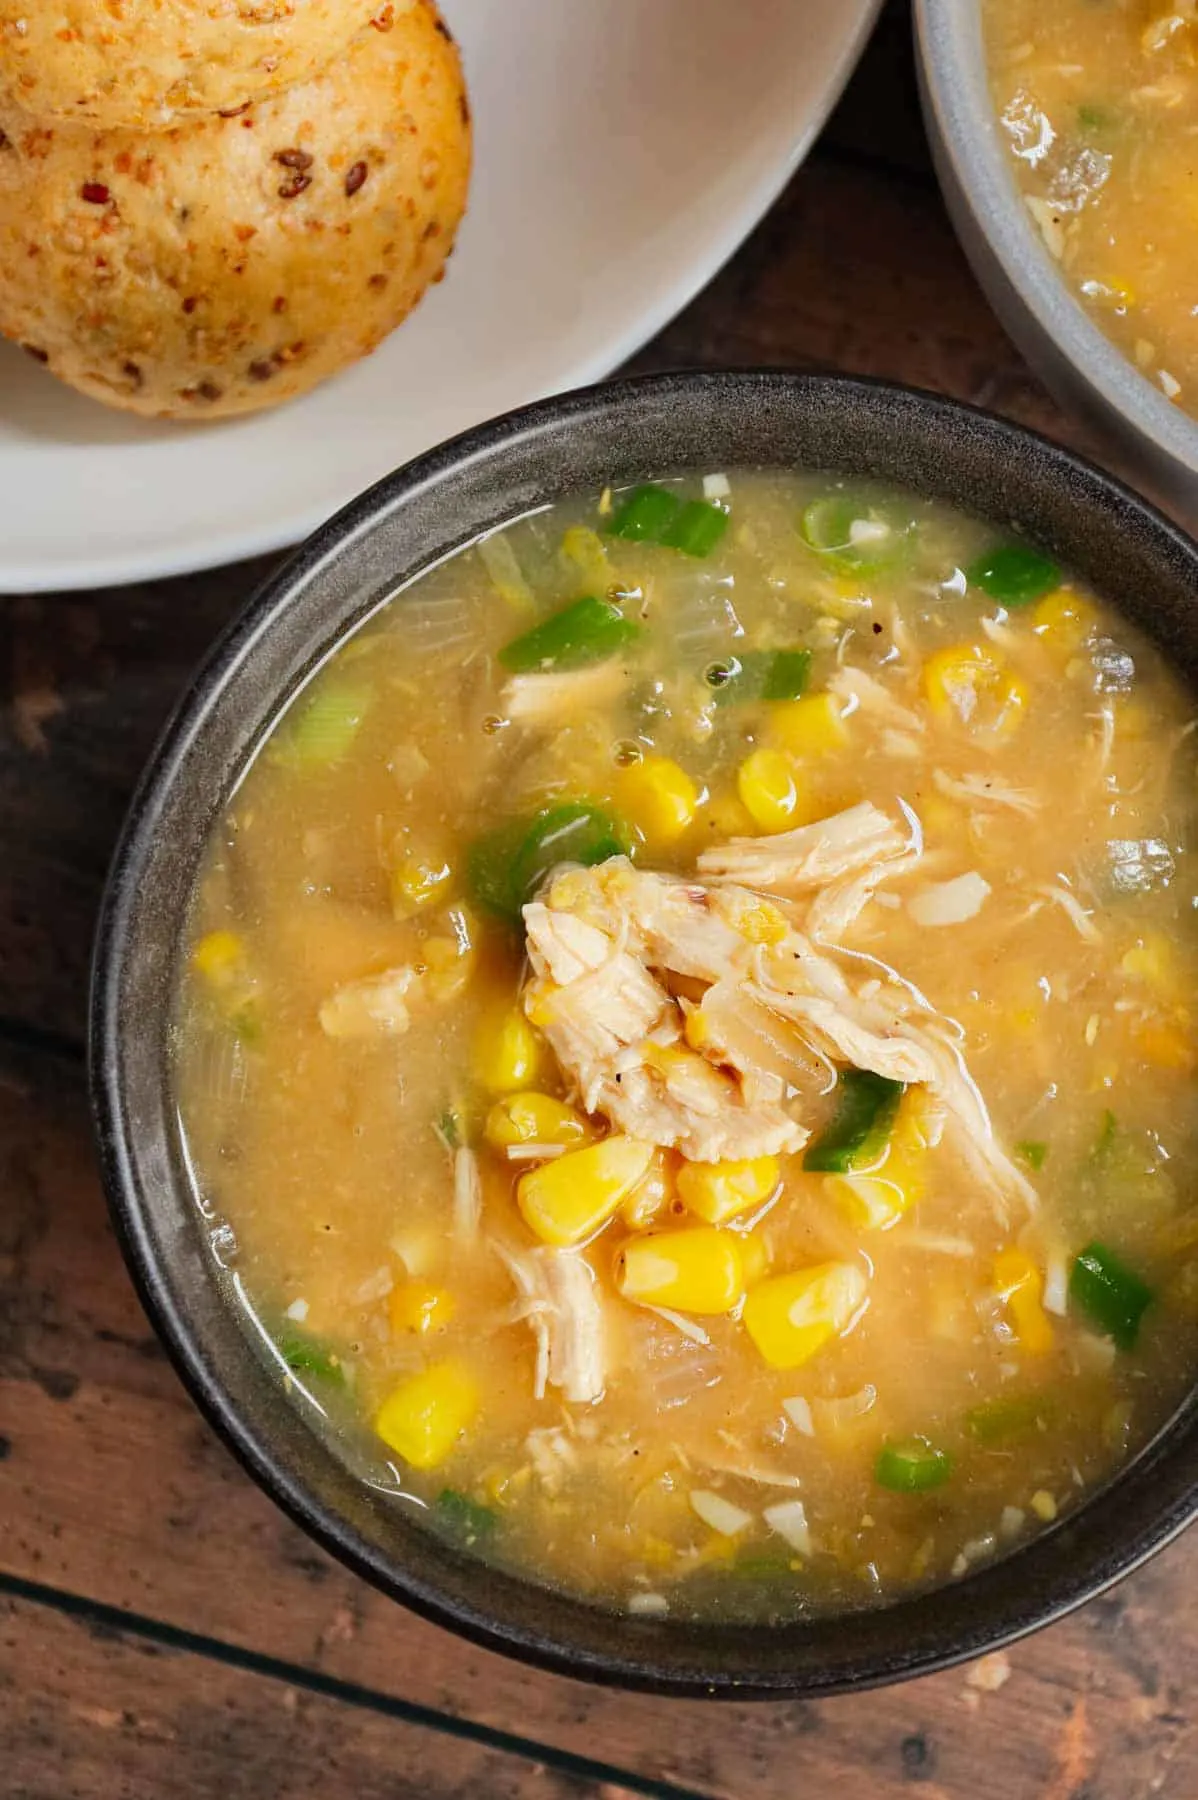 Sweet Corn Chicken Soup is a hearty soup recipe loaded with shredded chicken, corn kernels, cream style corn, minced garlic, minced ginger, soy sauce and green onions all in a tasty broth.